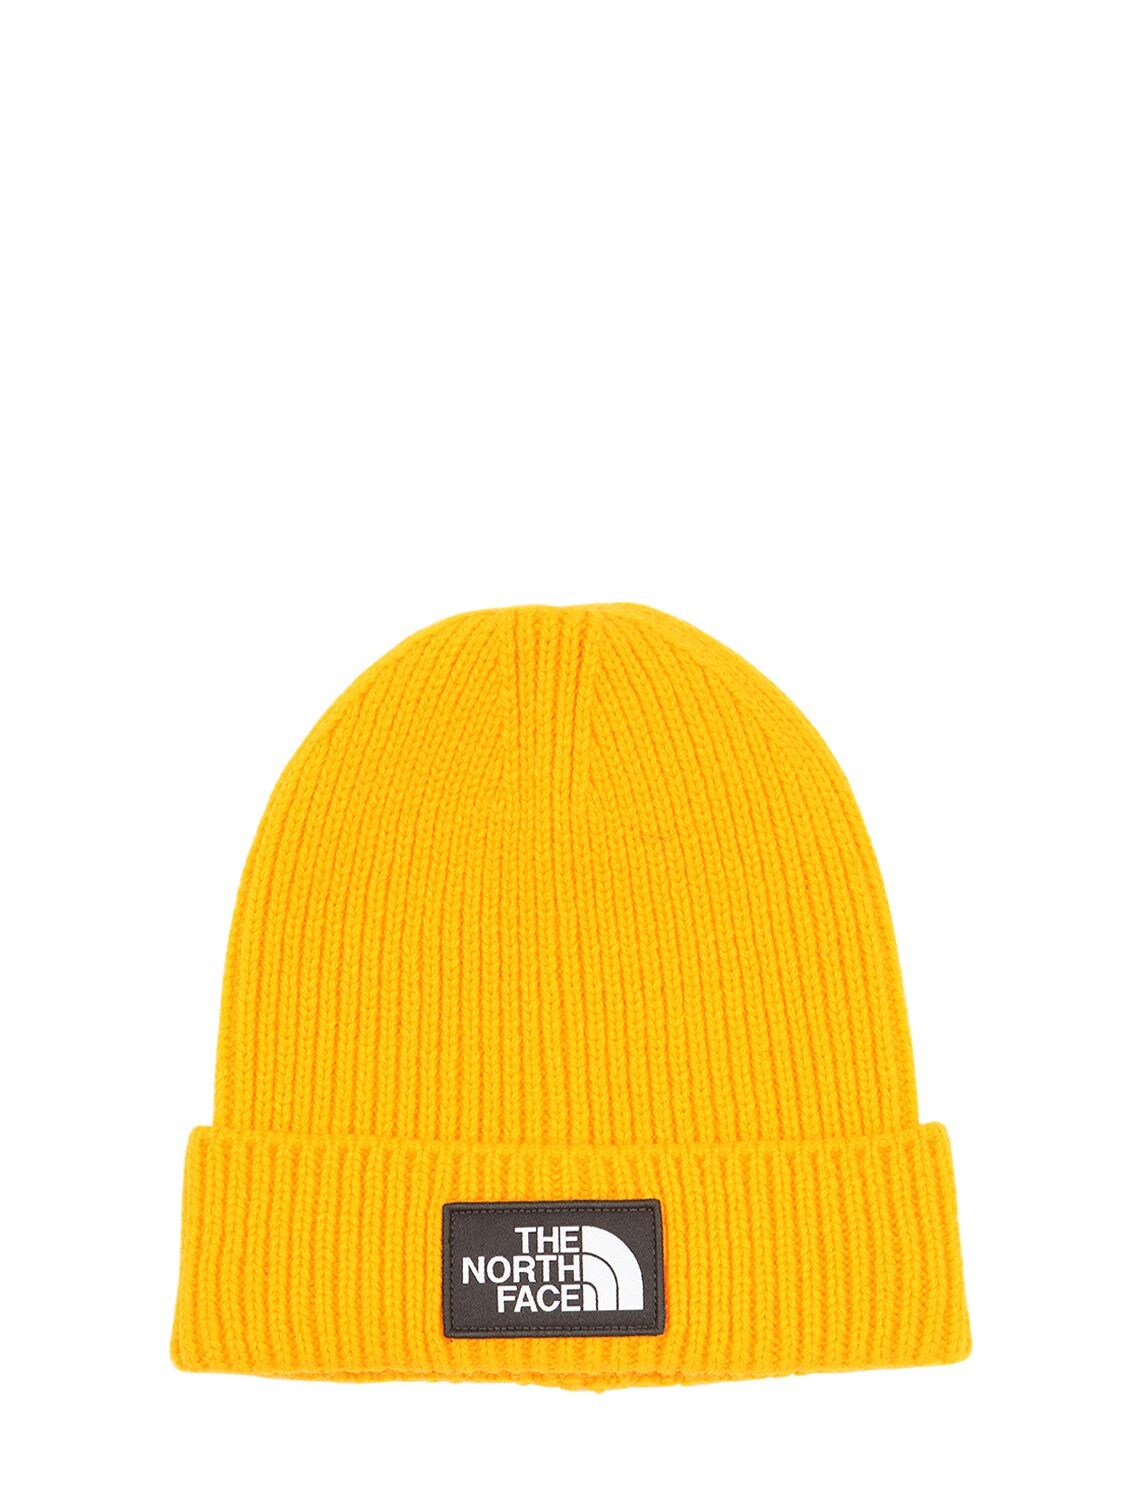 The North Face Logo Box Cuffed Acrylic Blend Beanie In Yellow